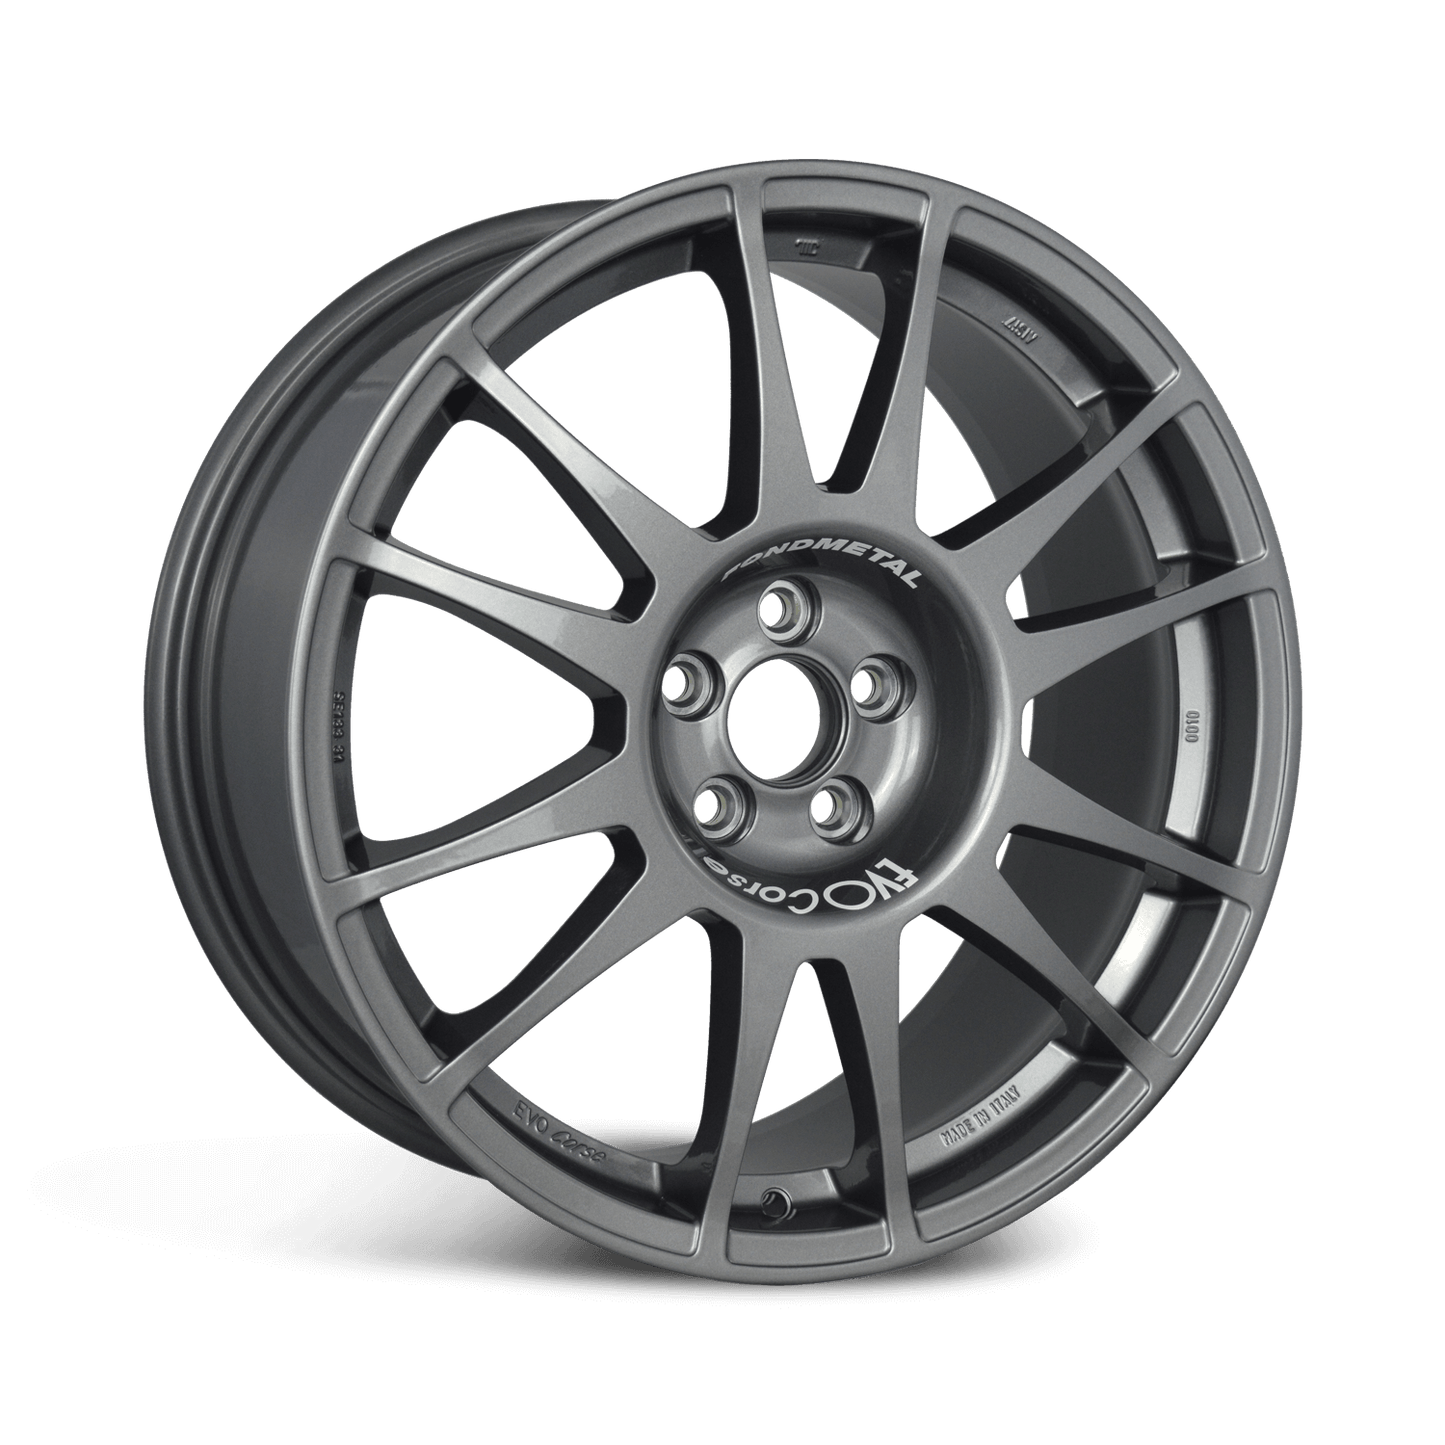 Front view of a Sanremo Corse 18-inch anthracite wheel with a 12-spoke design against a white background 